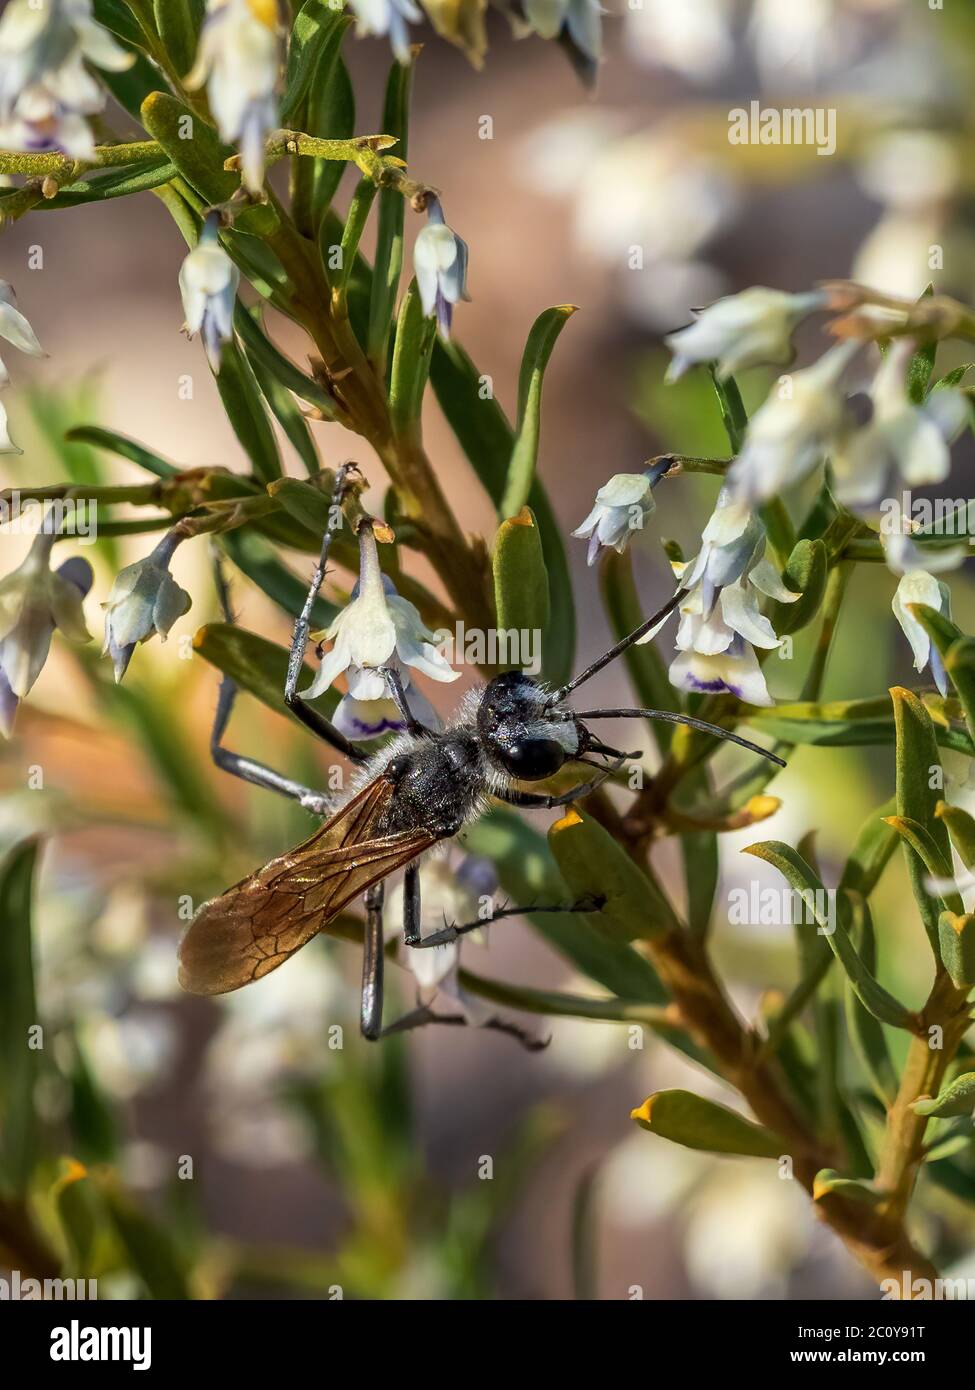 Wasp (of the Podalonia species) feeding on the flowers of a Shrub Violet bush. Stock Photo